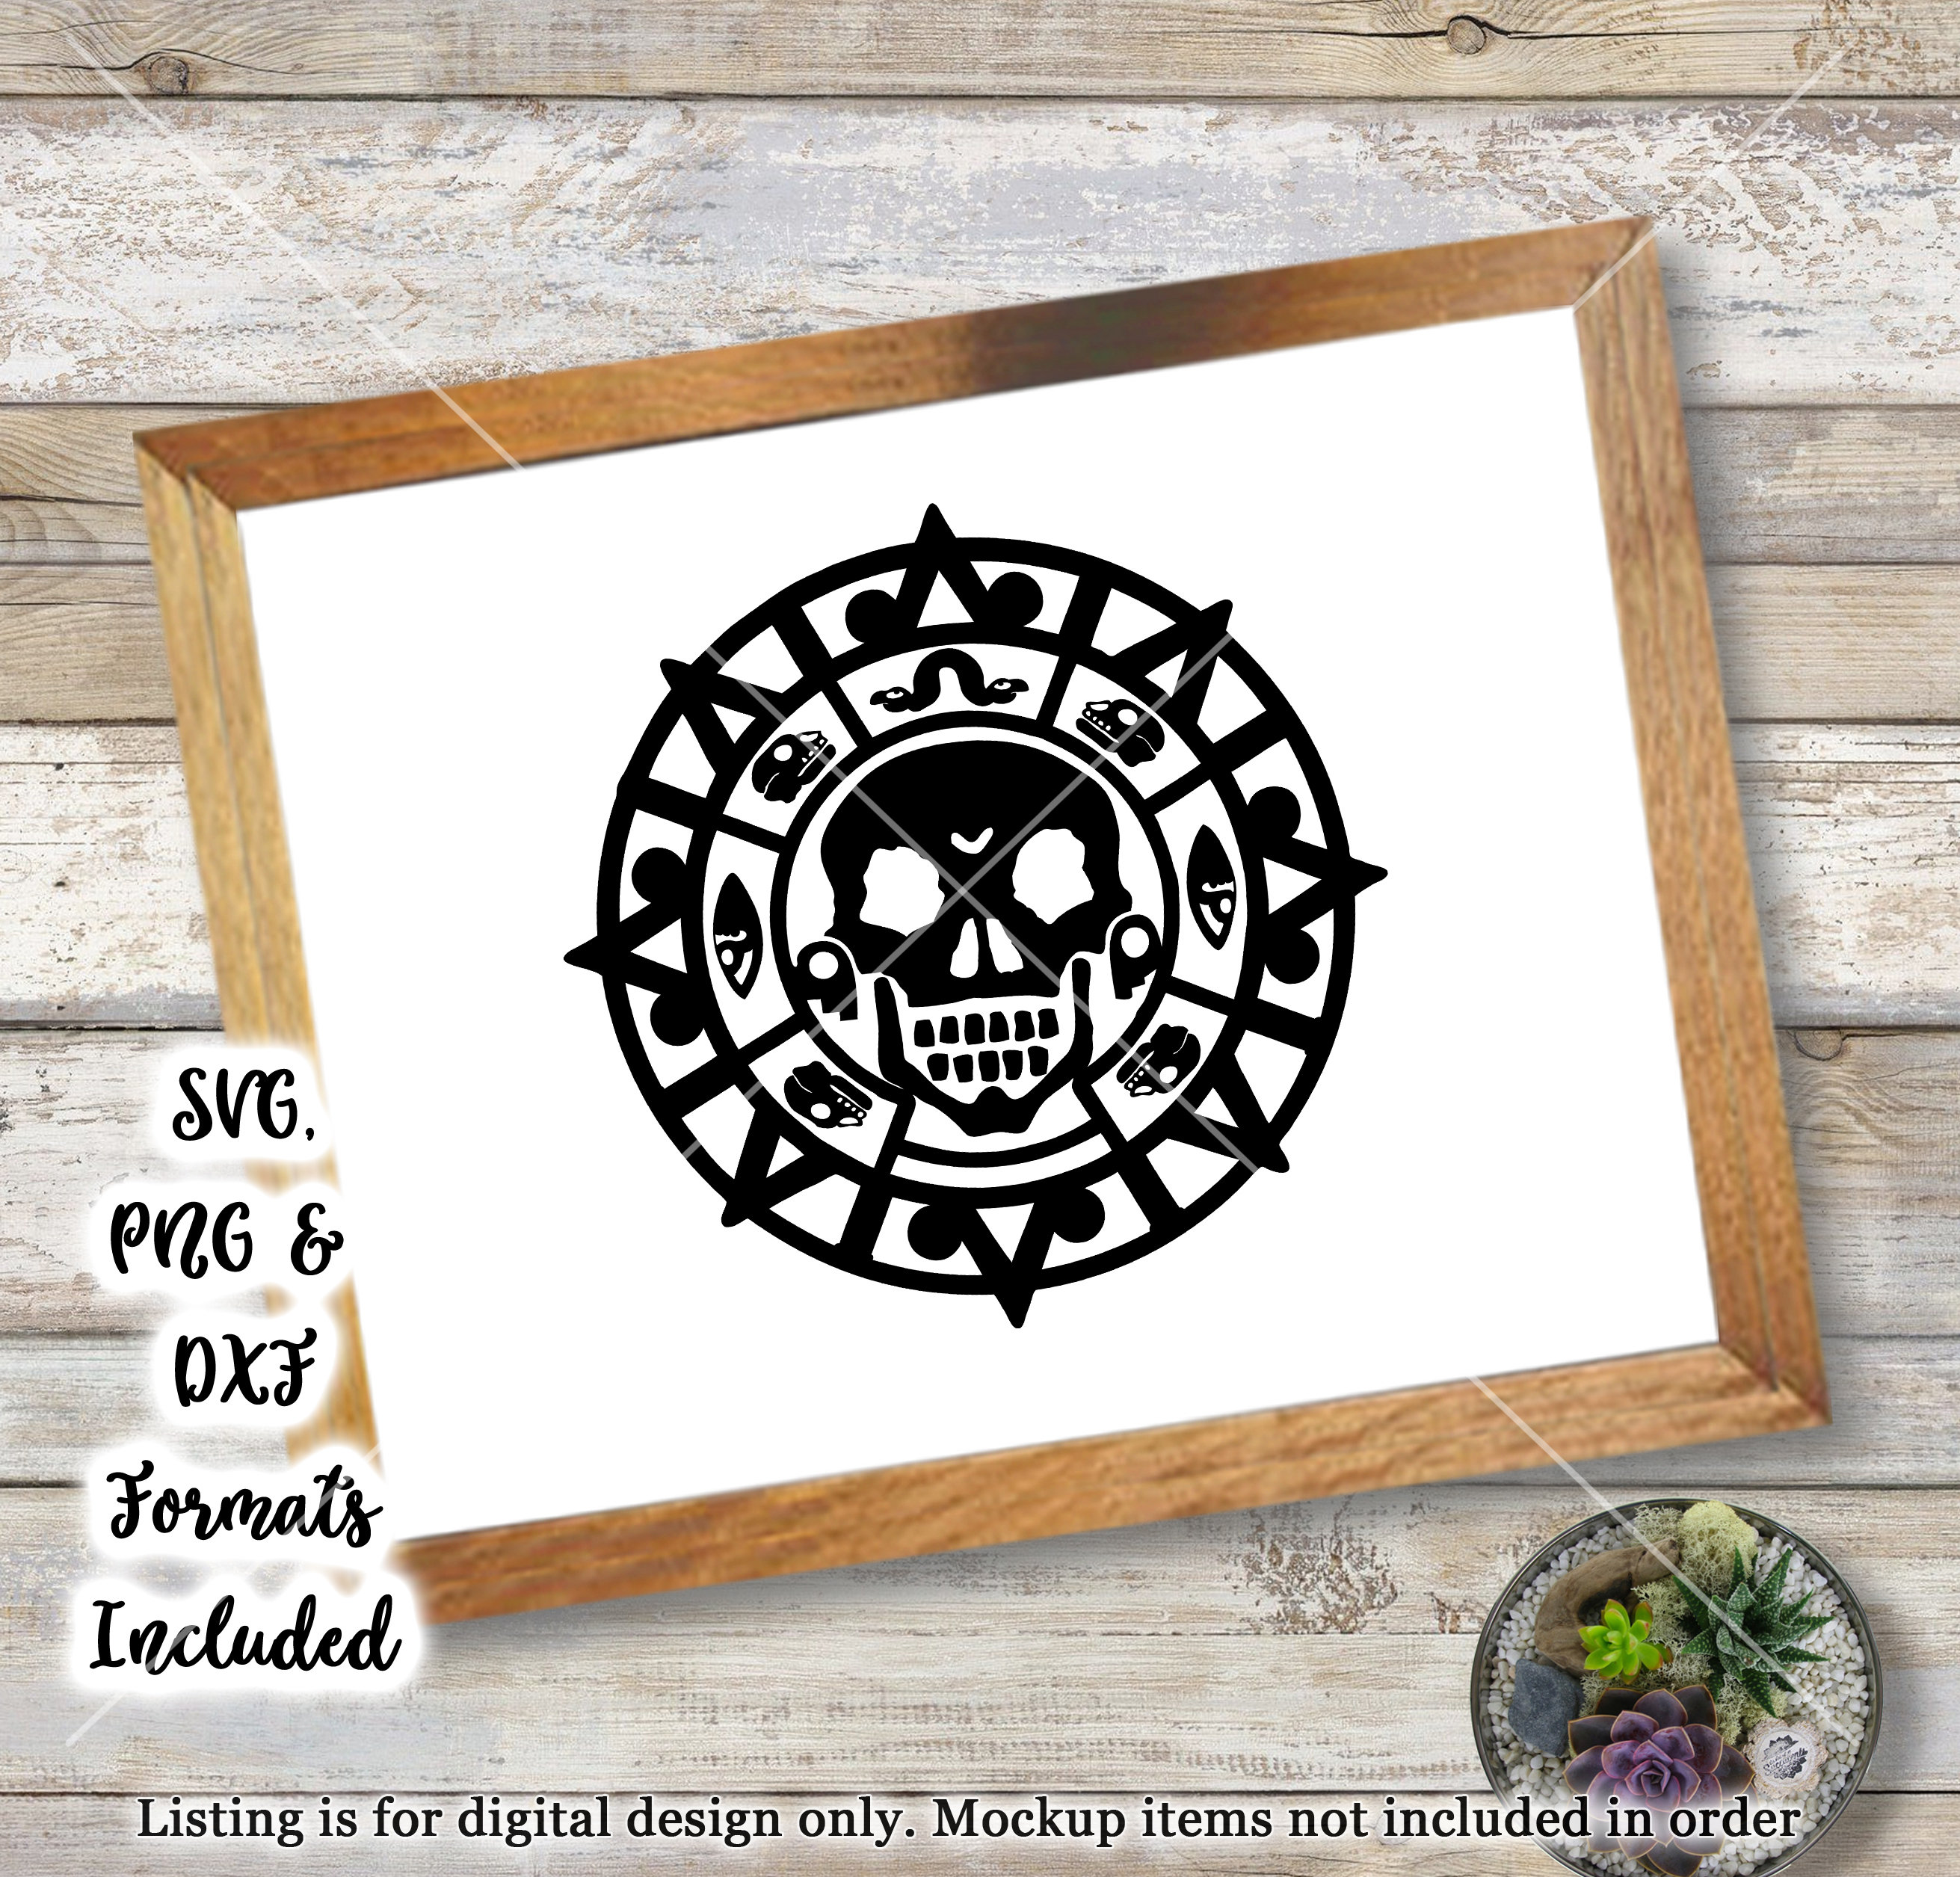 Pirate svg Pirates of the Caribbean Jack Sparrow Pirates Aztec Gold Coin,  Black Pearl svg files cricut silhouette cameo Sailing Pirate Ship